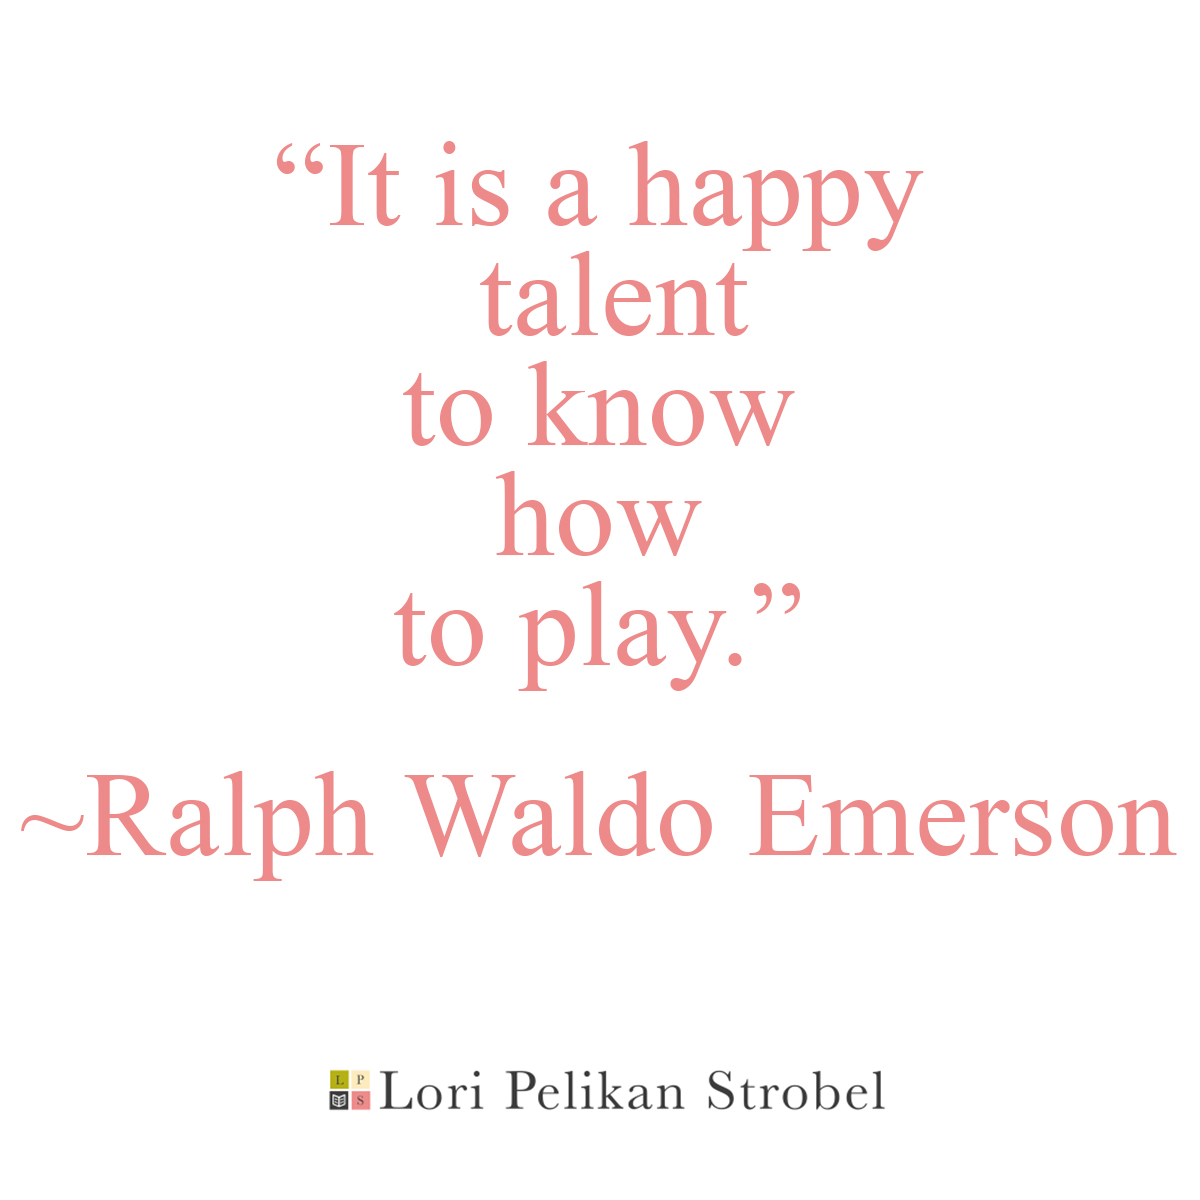 "It is a happy talent to know how to play" Ralph Waldo Emerson